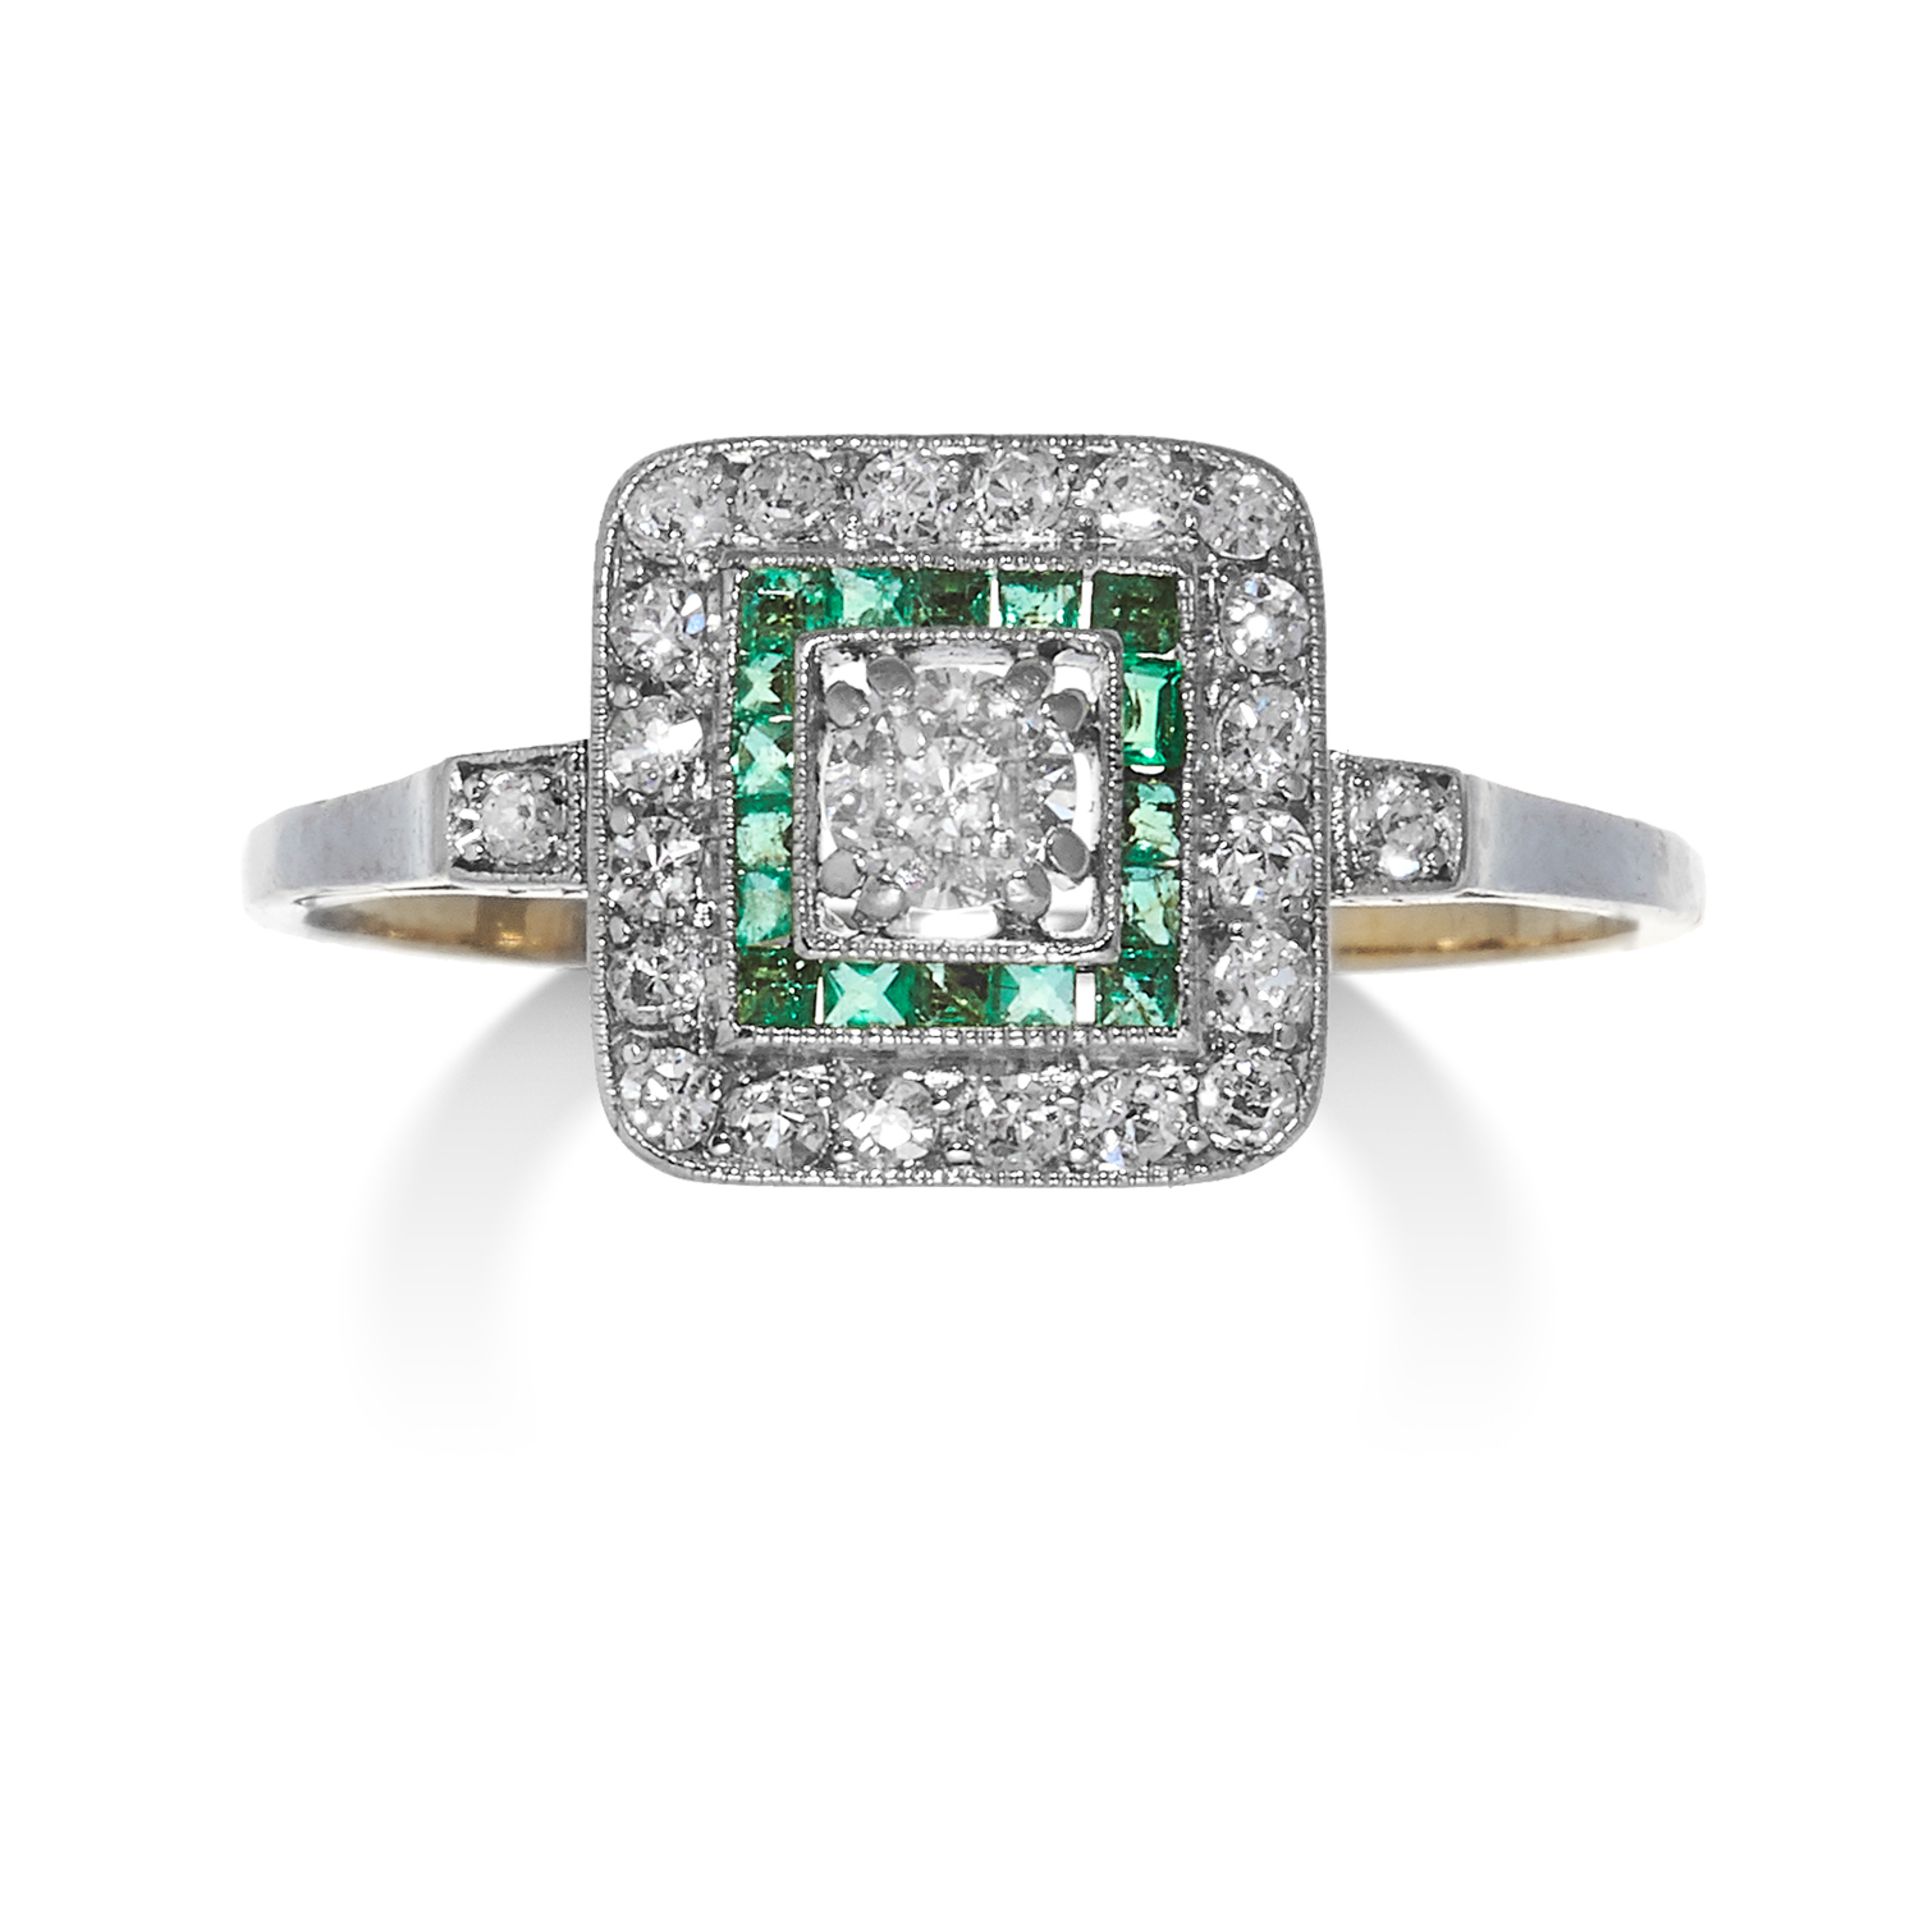 AN ART DECO DIAMOND AND EMERALD RING in high carat yellow gold and platinum, the old cut diamond